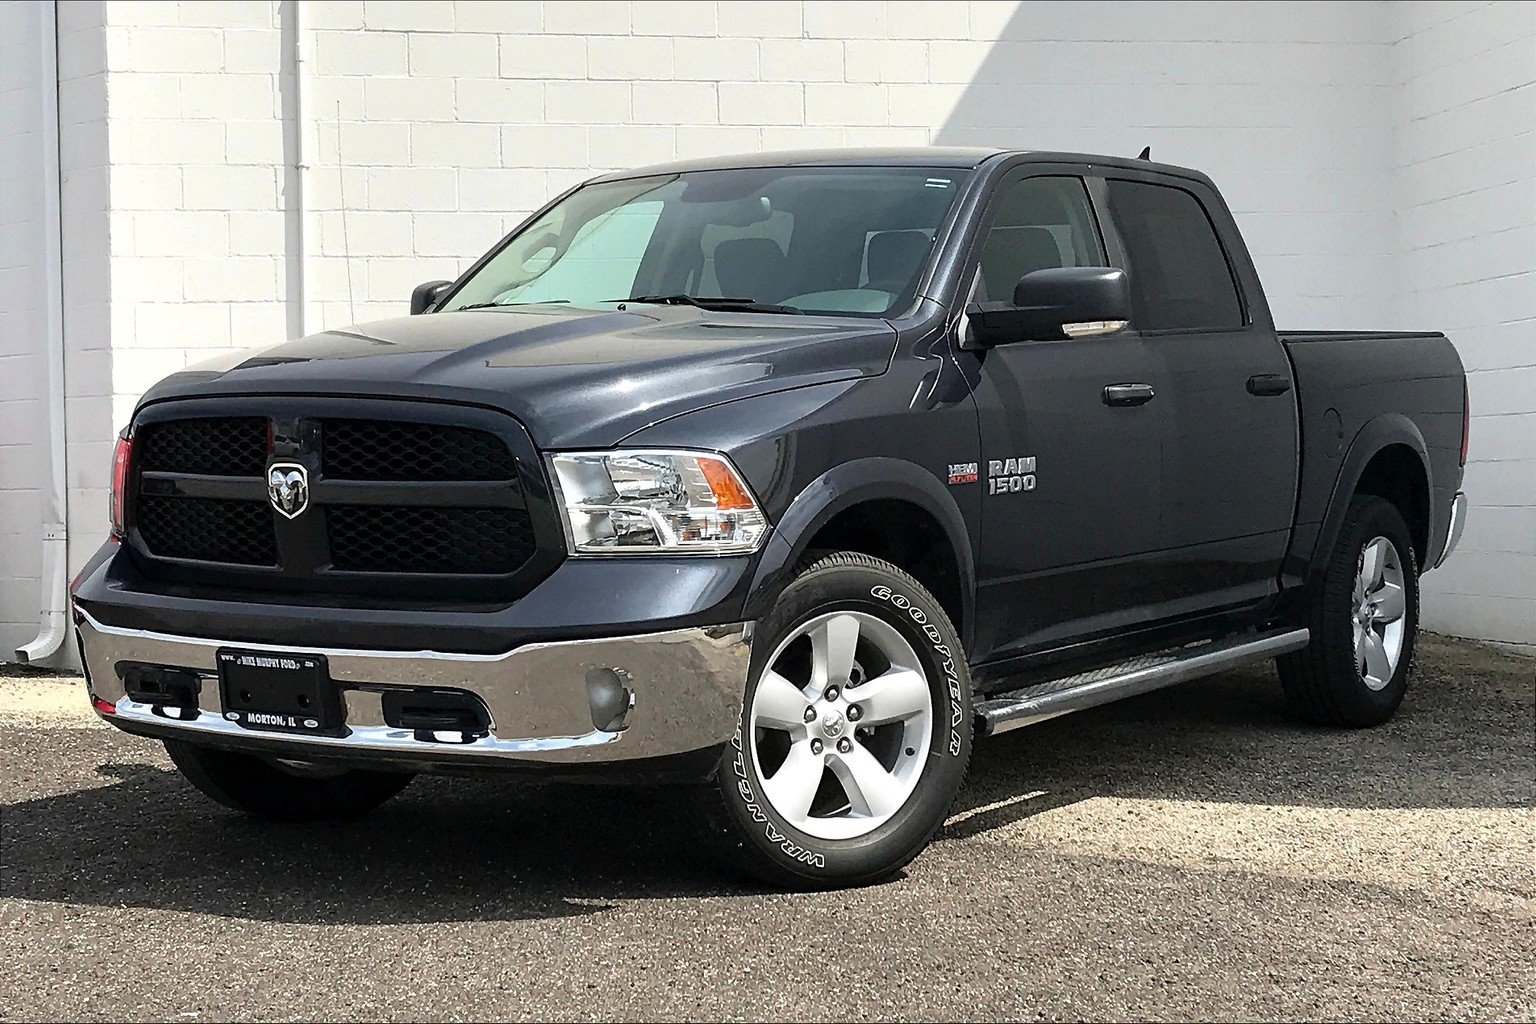 Pre-Owned 2018 Ram 1500 4WDSLT OUTDOORSMAN 4D Crew Cab in Morton 2018 Ram 1500 Ticking On Startup